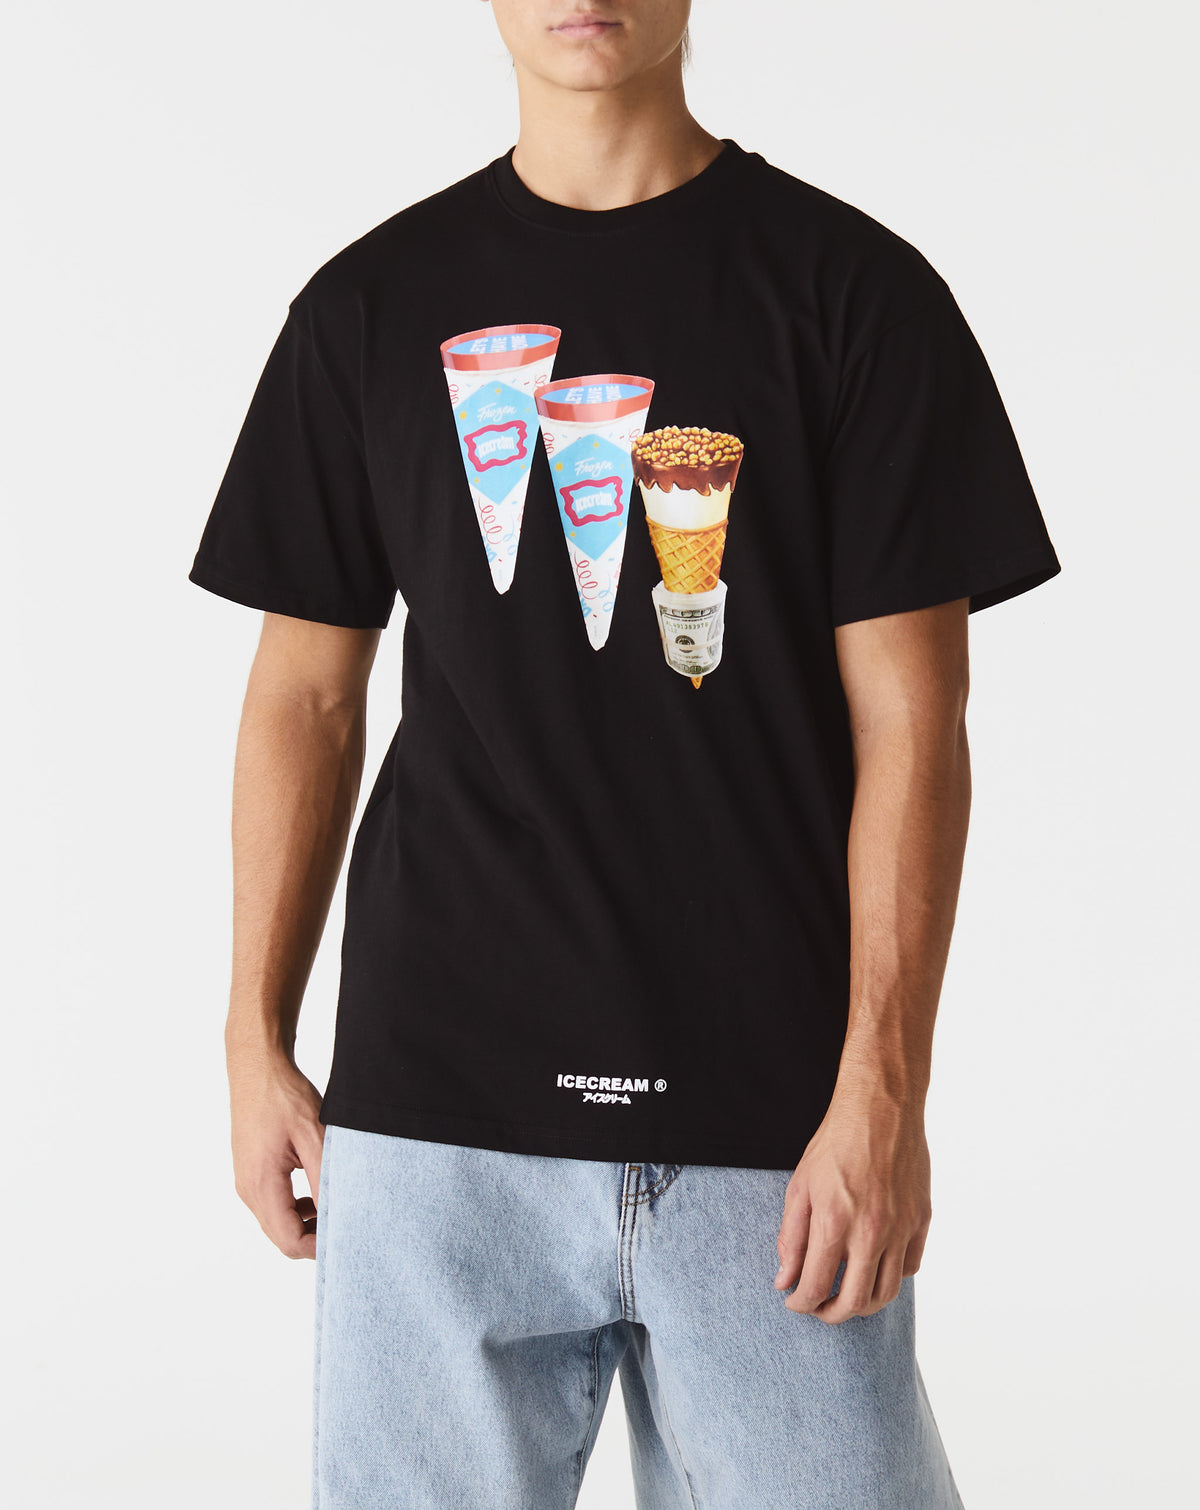 IceCream Skate Faster T-Shirt - Rule of Next Apparel